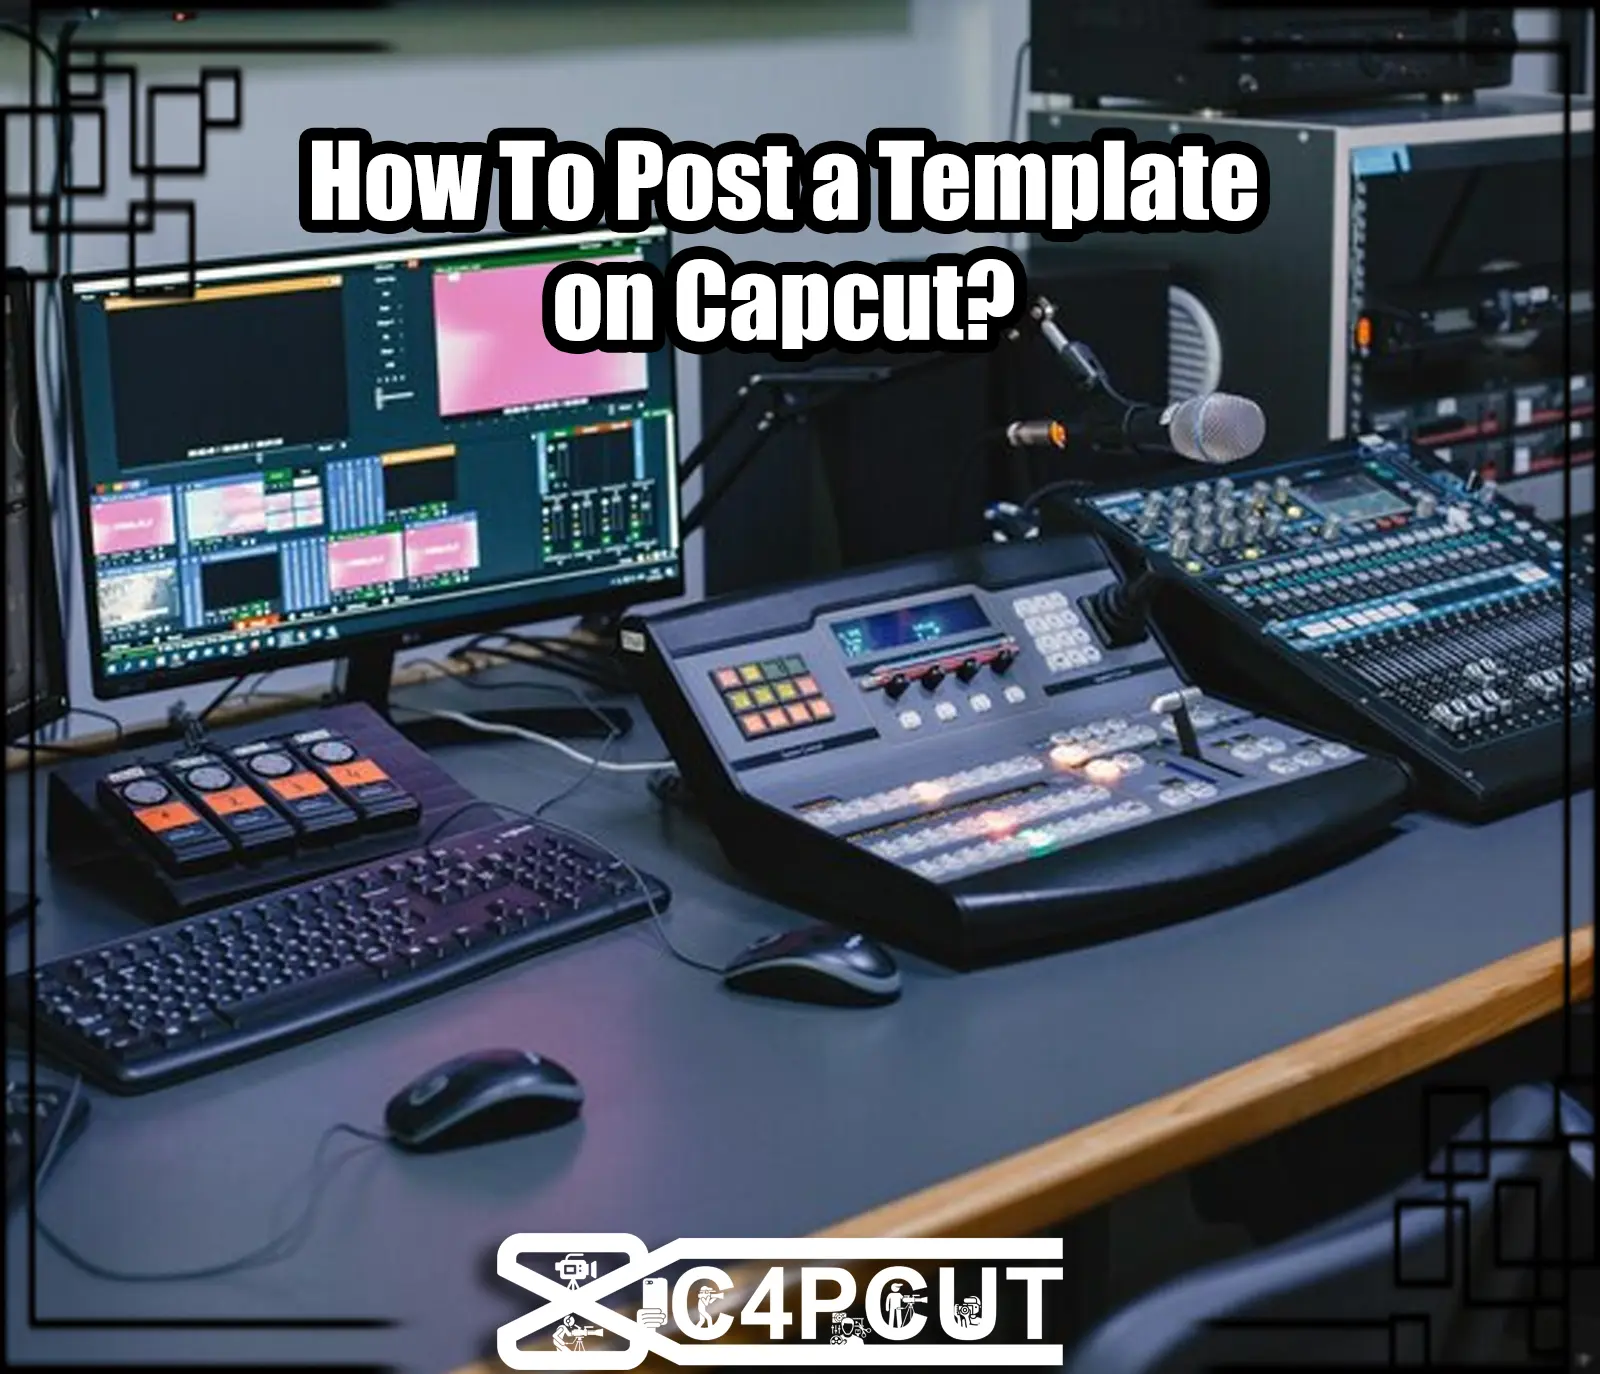 How To Post a Template on Capcut?